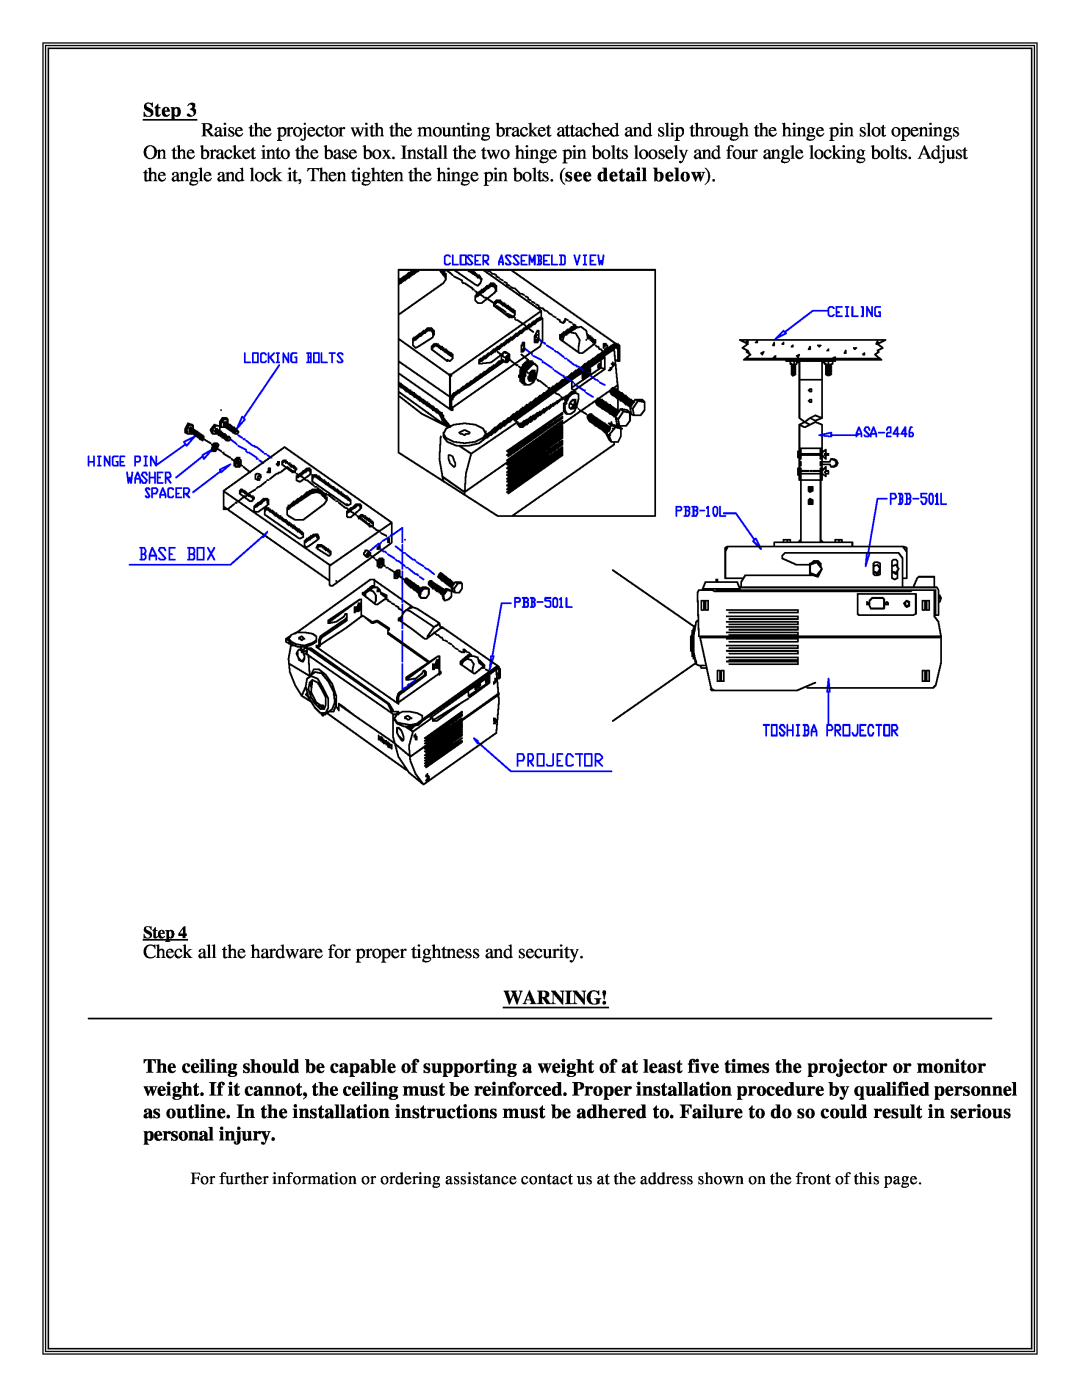 Toshiba PBM-501L installation instructions Check all the hardware for proper tightness and security 